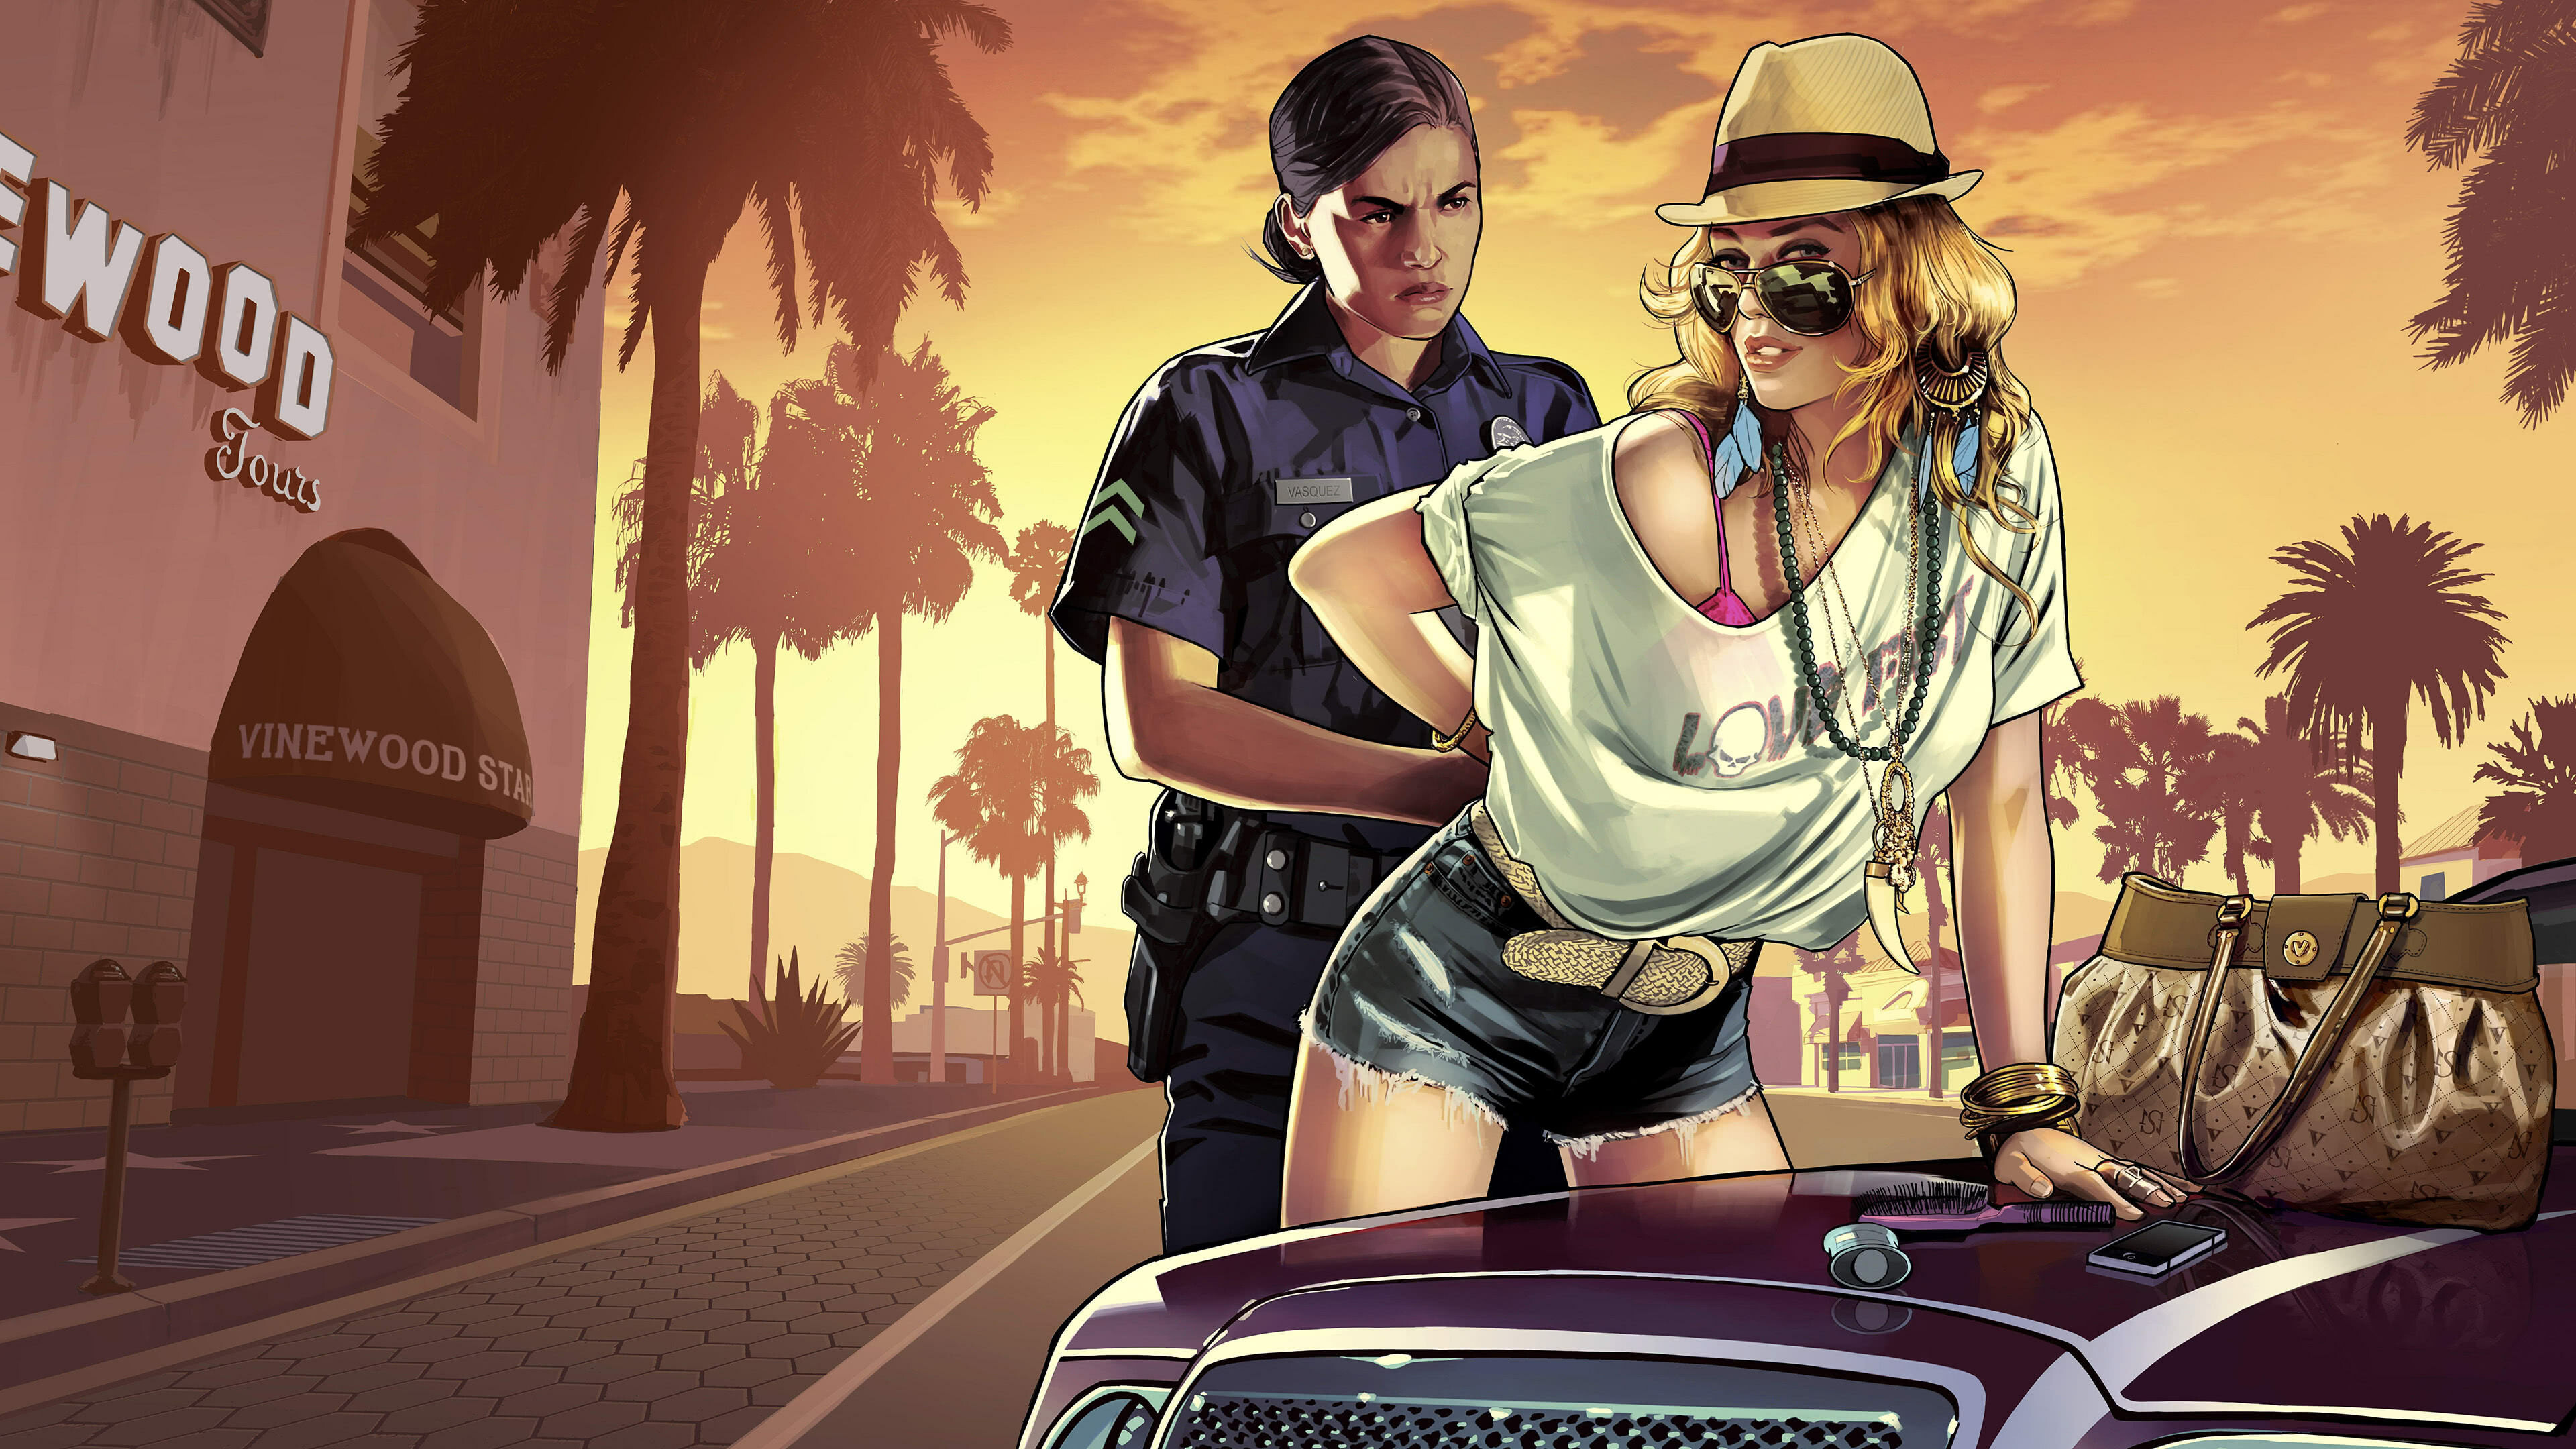 Grand Theft Auto 5: It won year-end accolades including Game of the Year awards from several gaming publications. 3840x2160 4K Wallpaper.